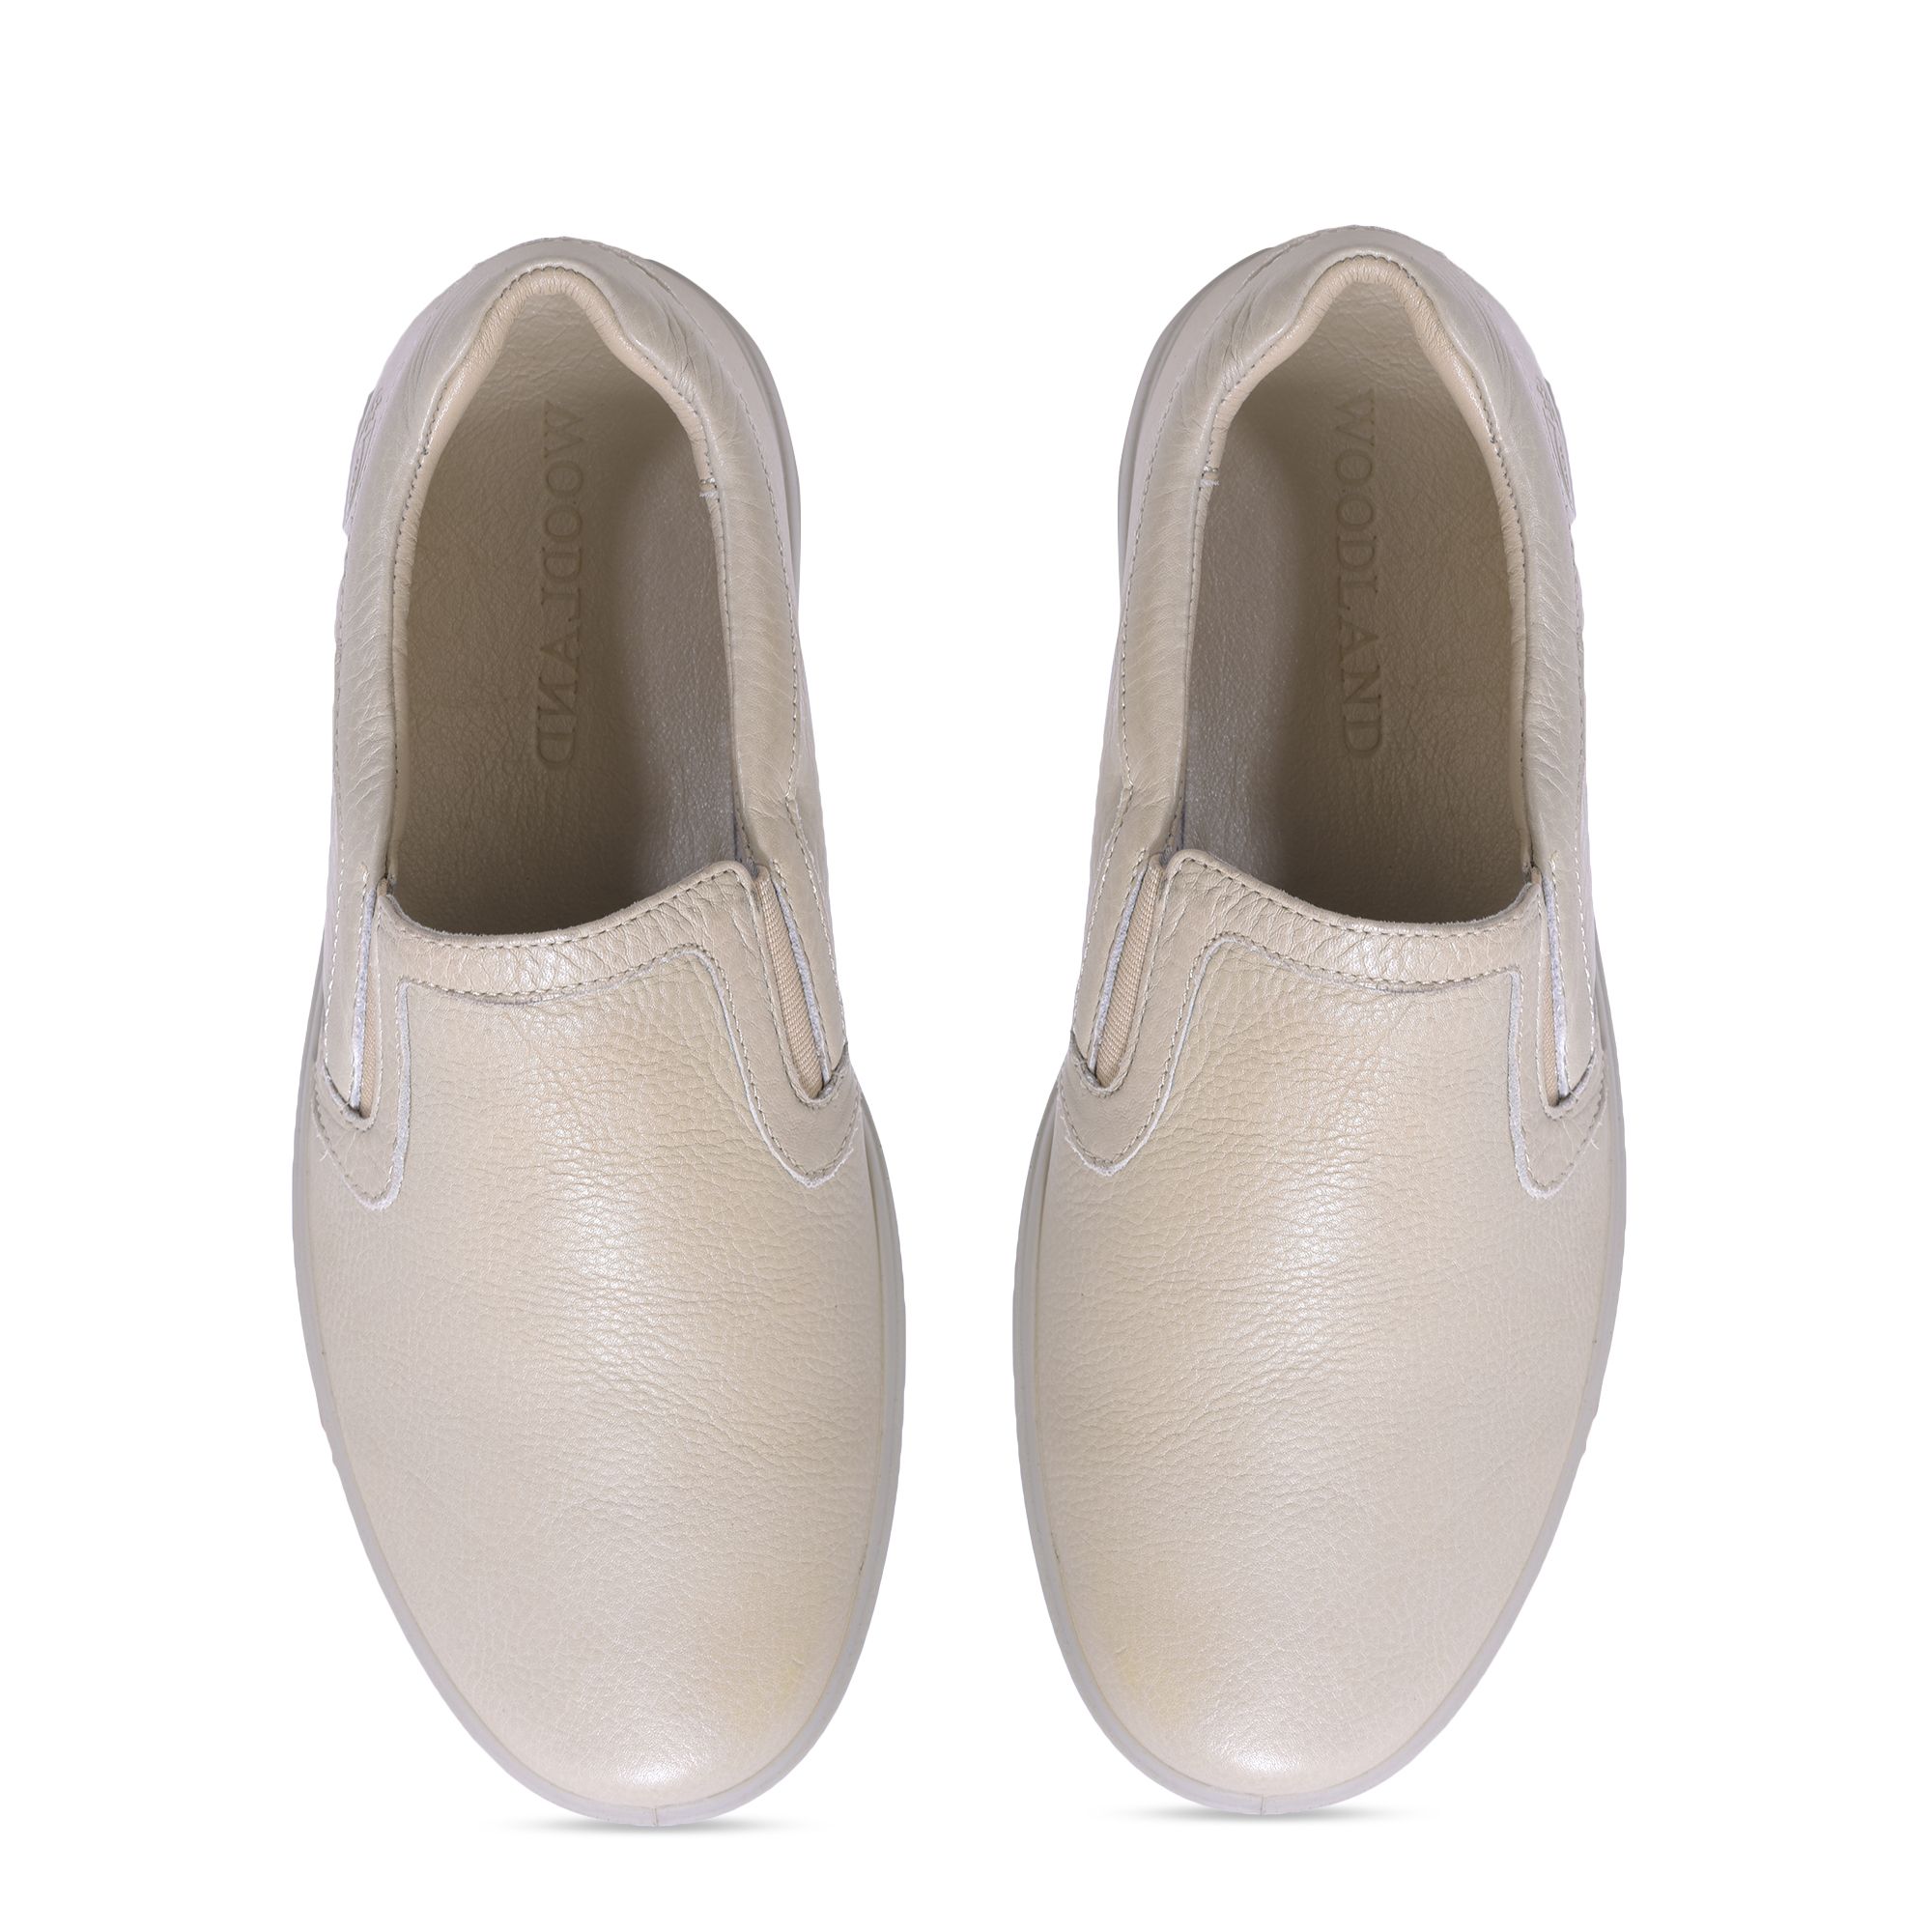 Dove white slip-on casual shoes